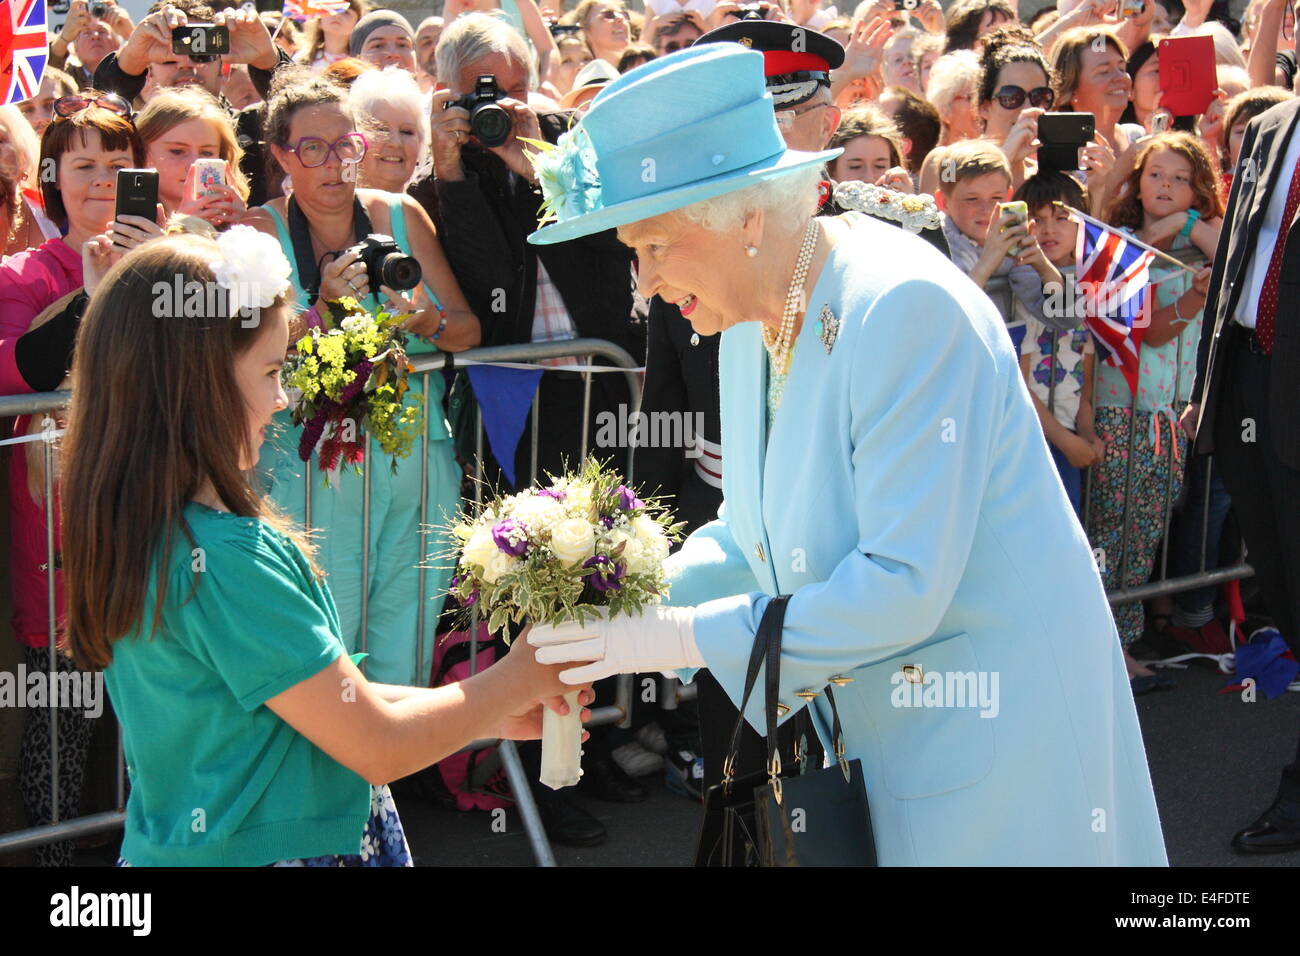 Matlock, Derbyshire, UK. 10th July 2014. Maggie Young, 8, from Walton-on-Trent in South Derbyshire presents Queen Elizabeth II with a posy on her arrival at Matlock Station.. Credit:  Matthew Taylor/Alamy Live News Stock Photo